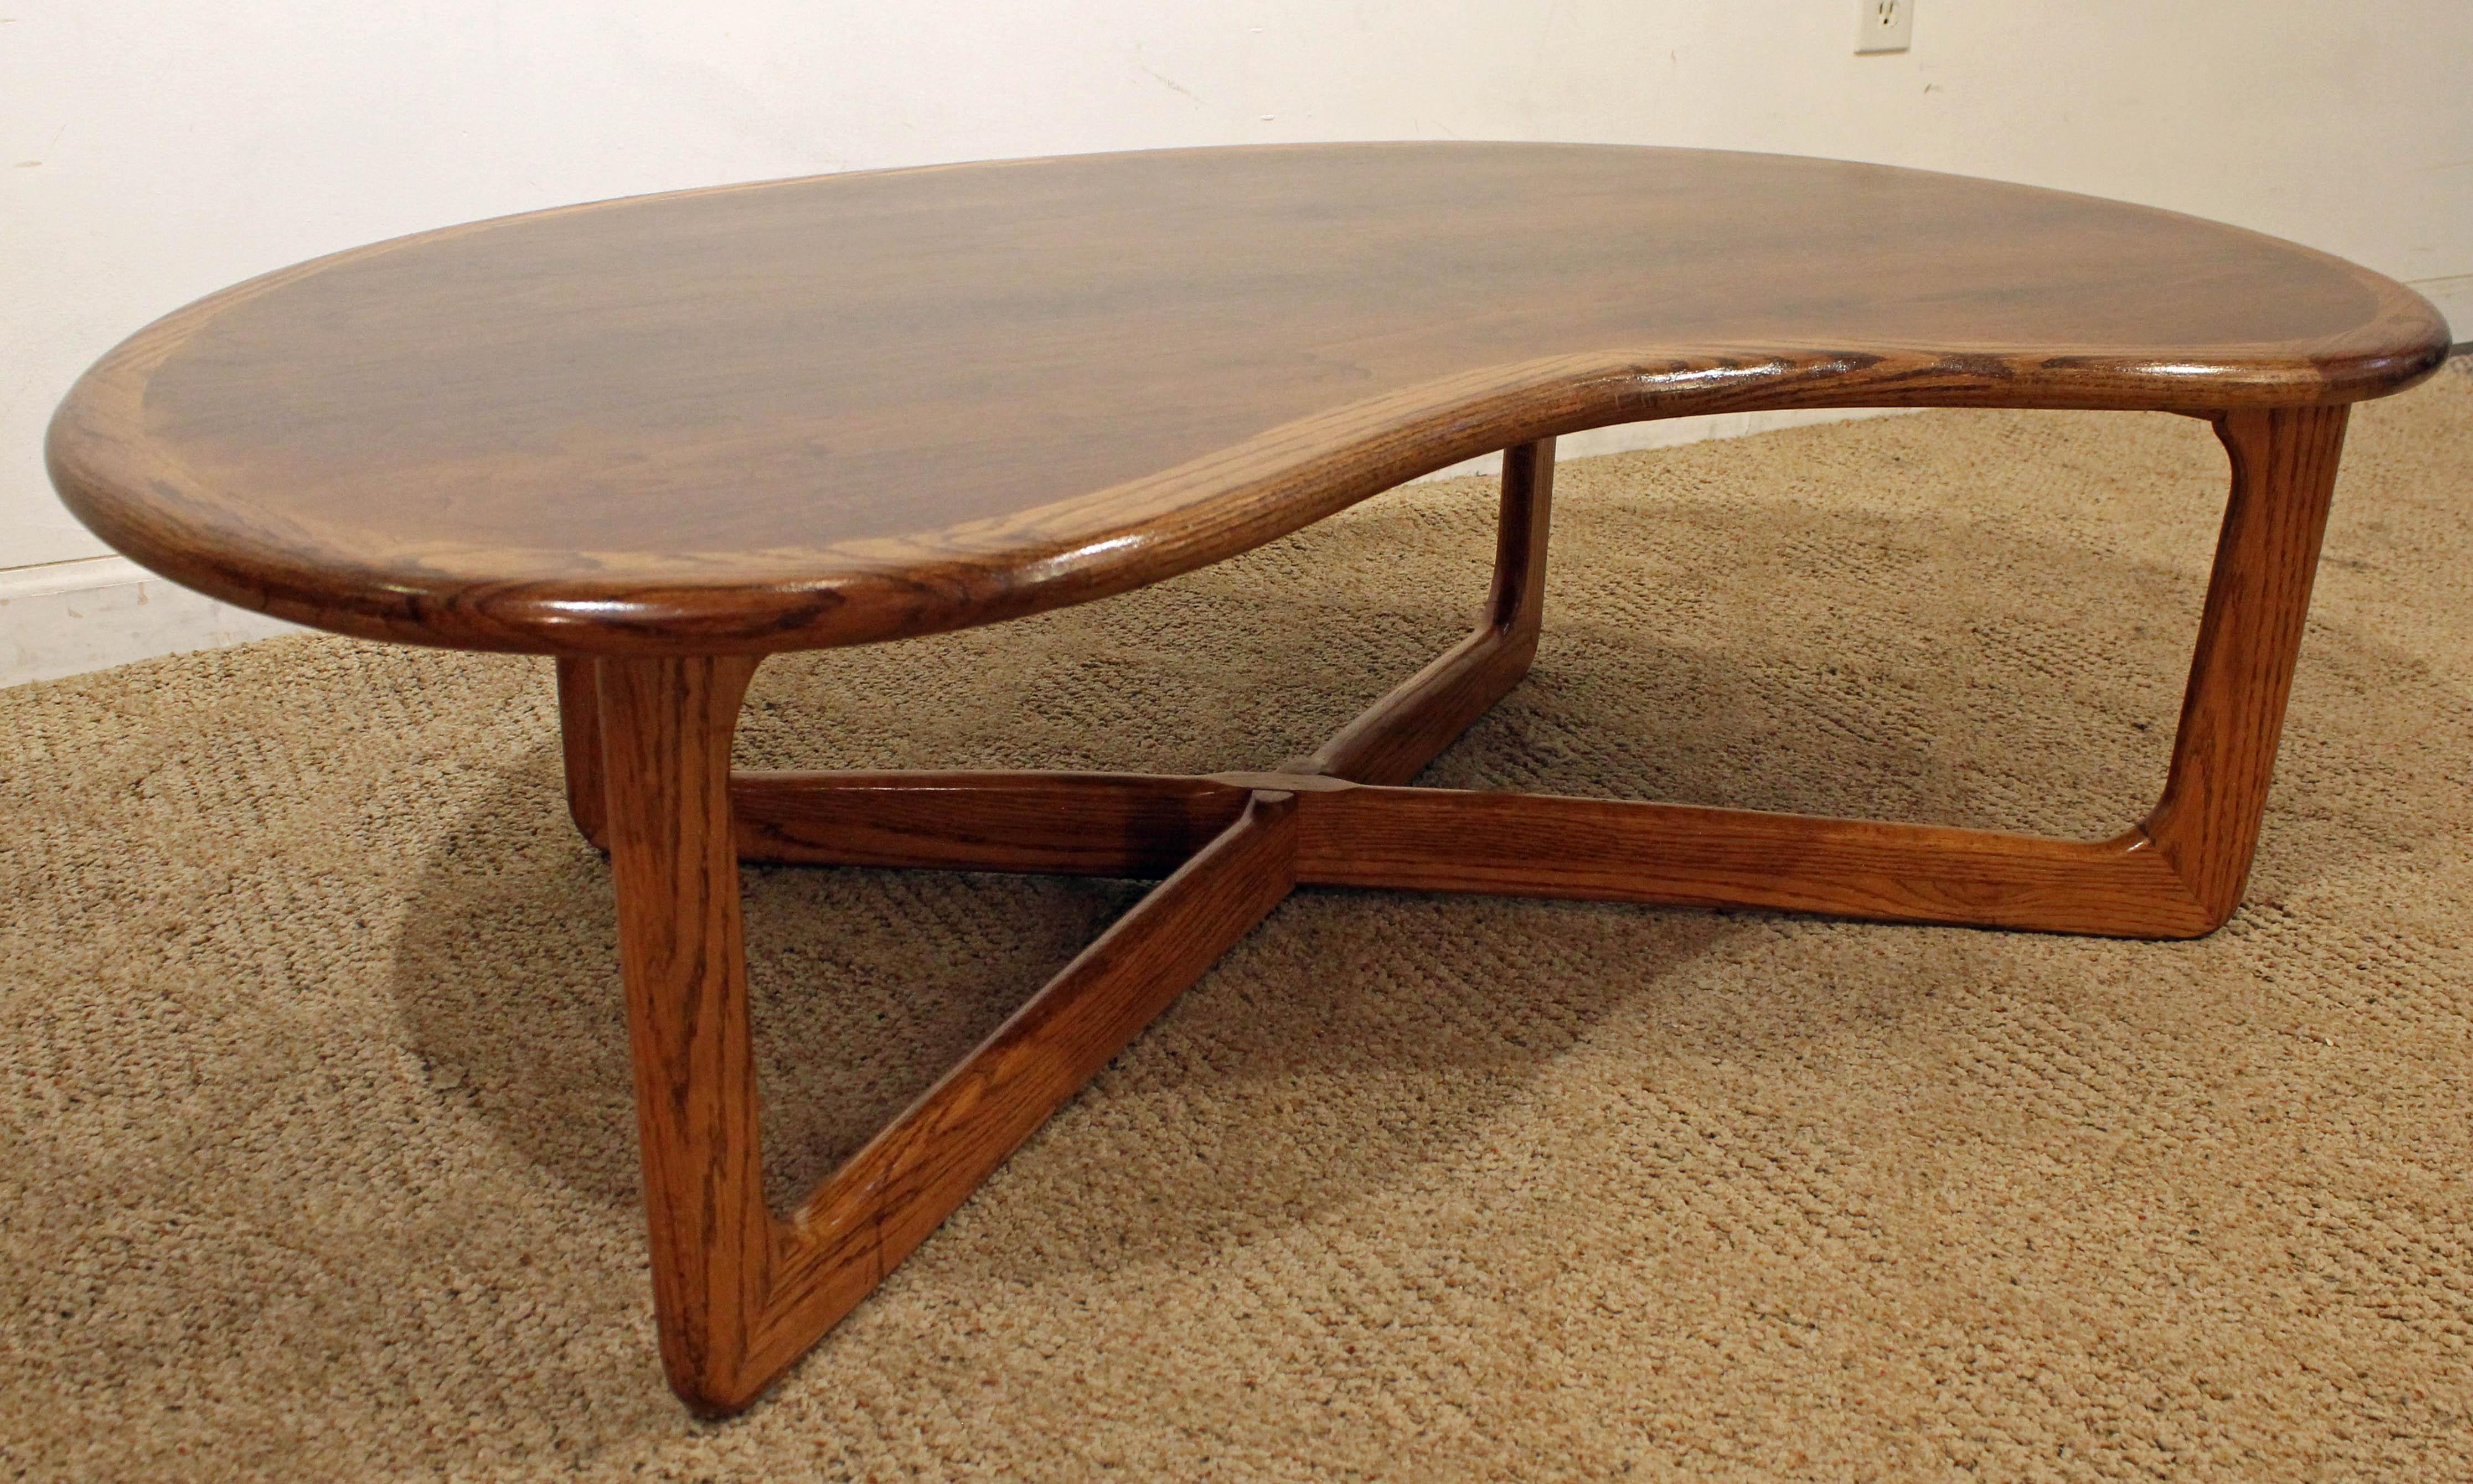 Offered is a Mid-Century Modern coffee table, made by Lane 